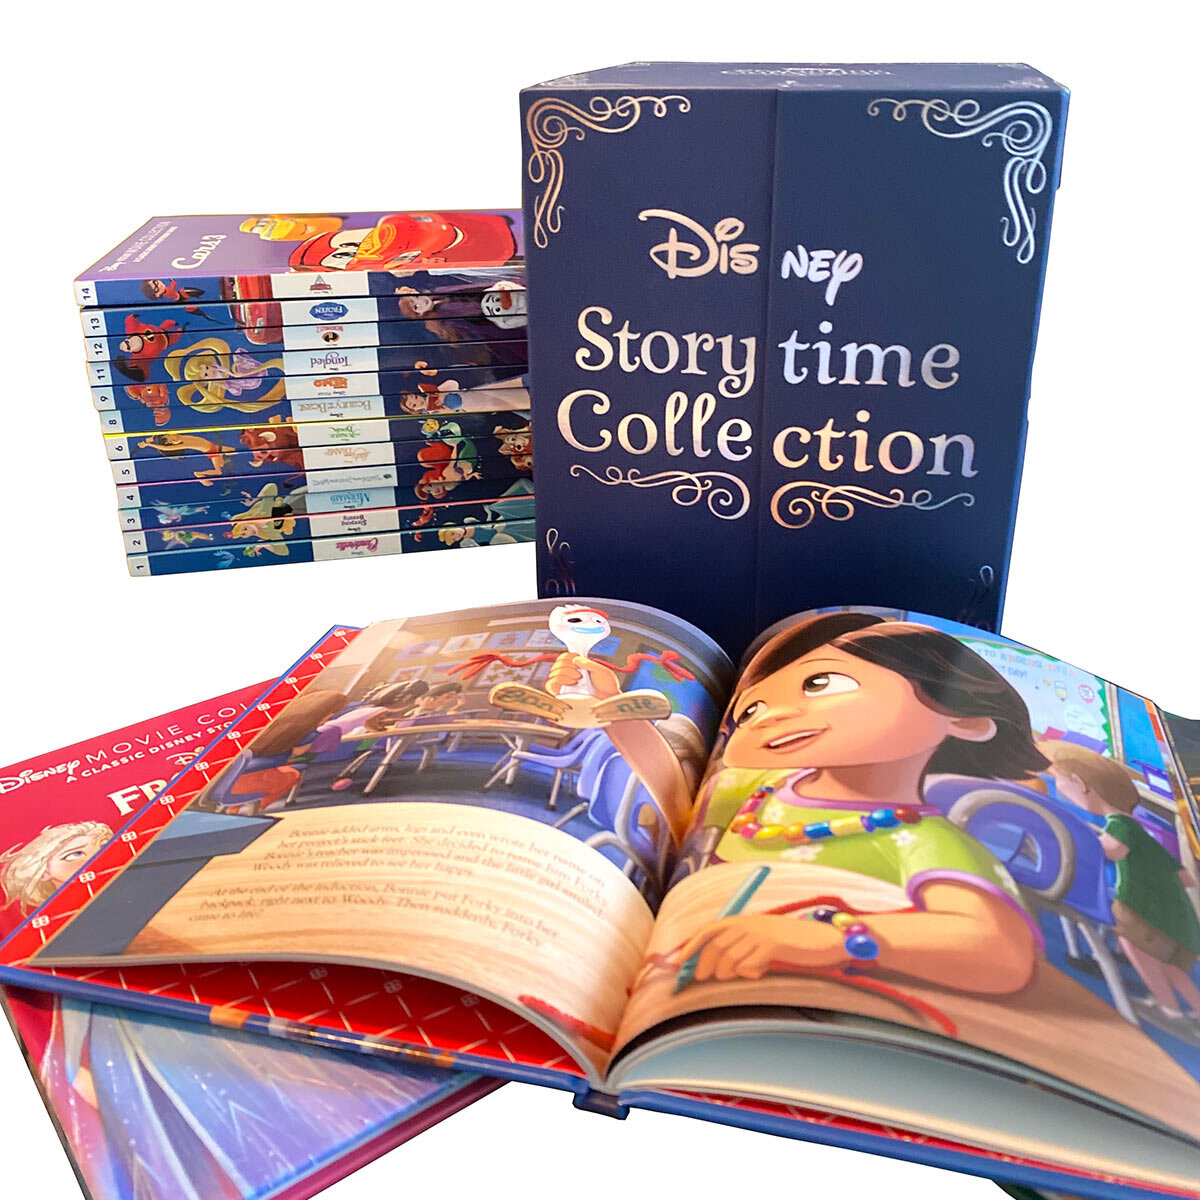 Disney storytime collection lifestyle image